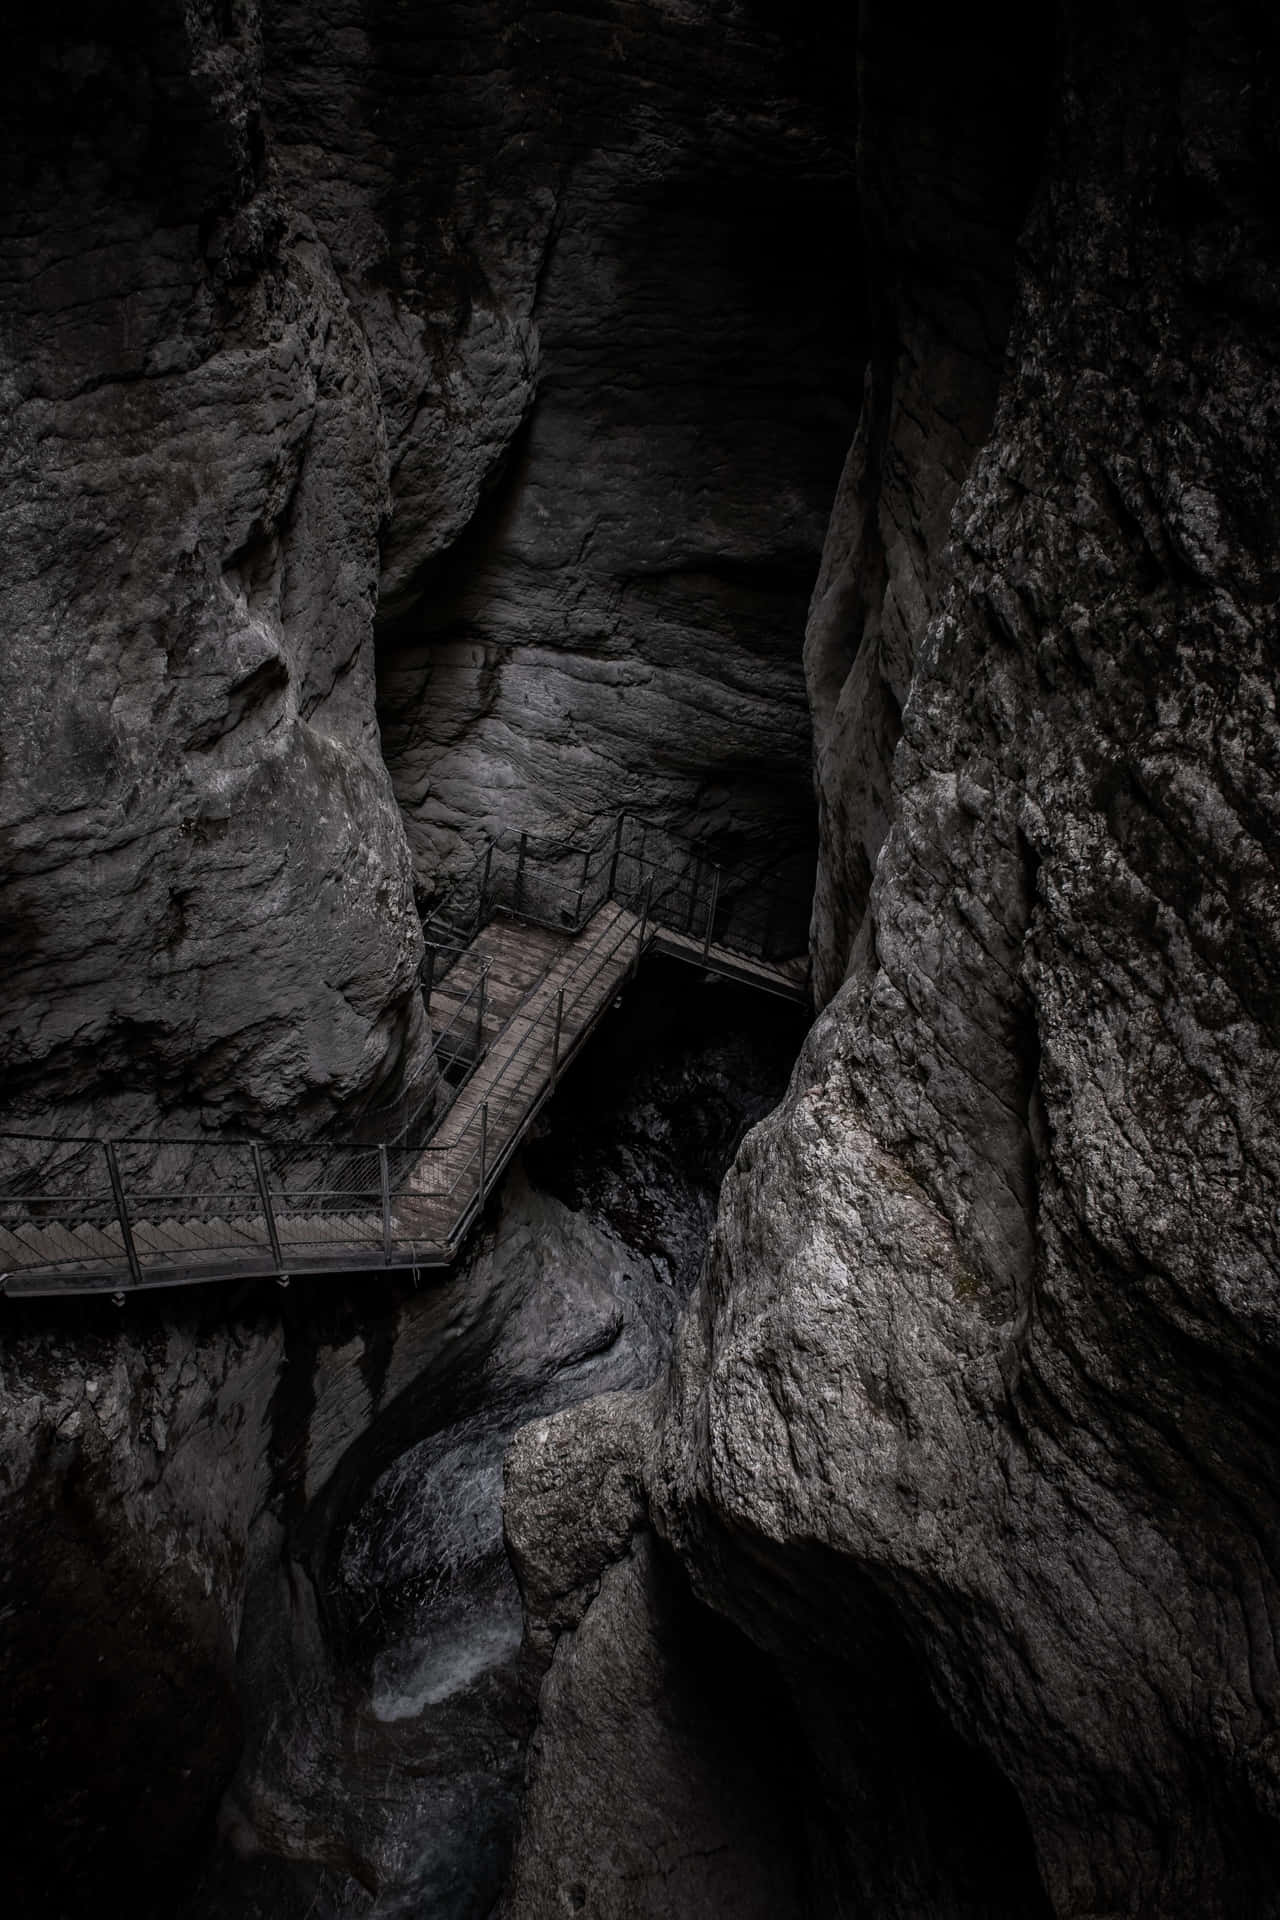 A Wooden Walkway In A Dark Canyon